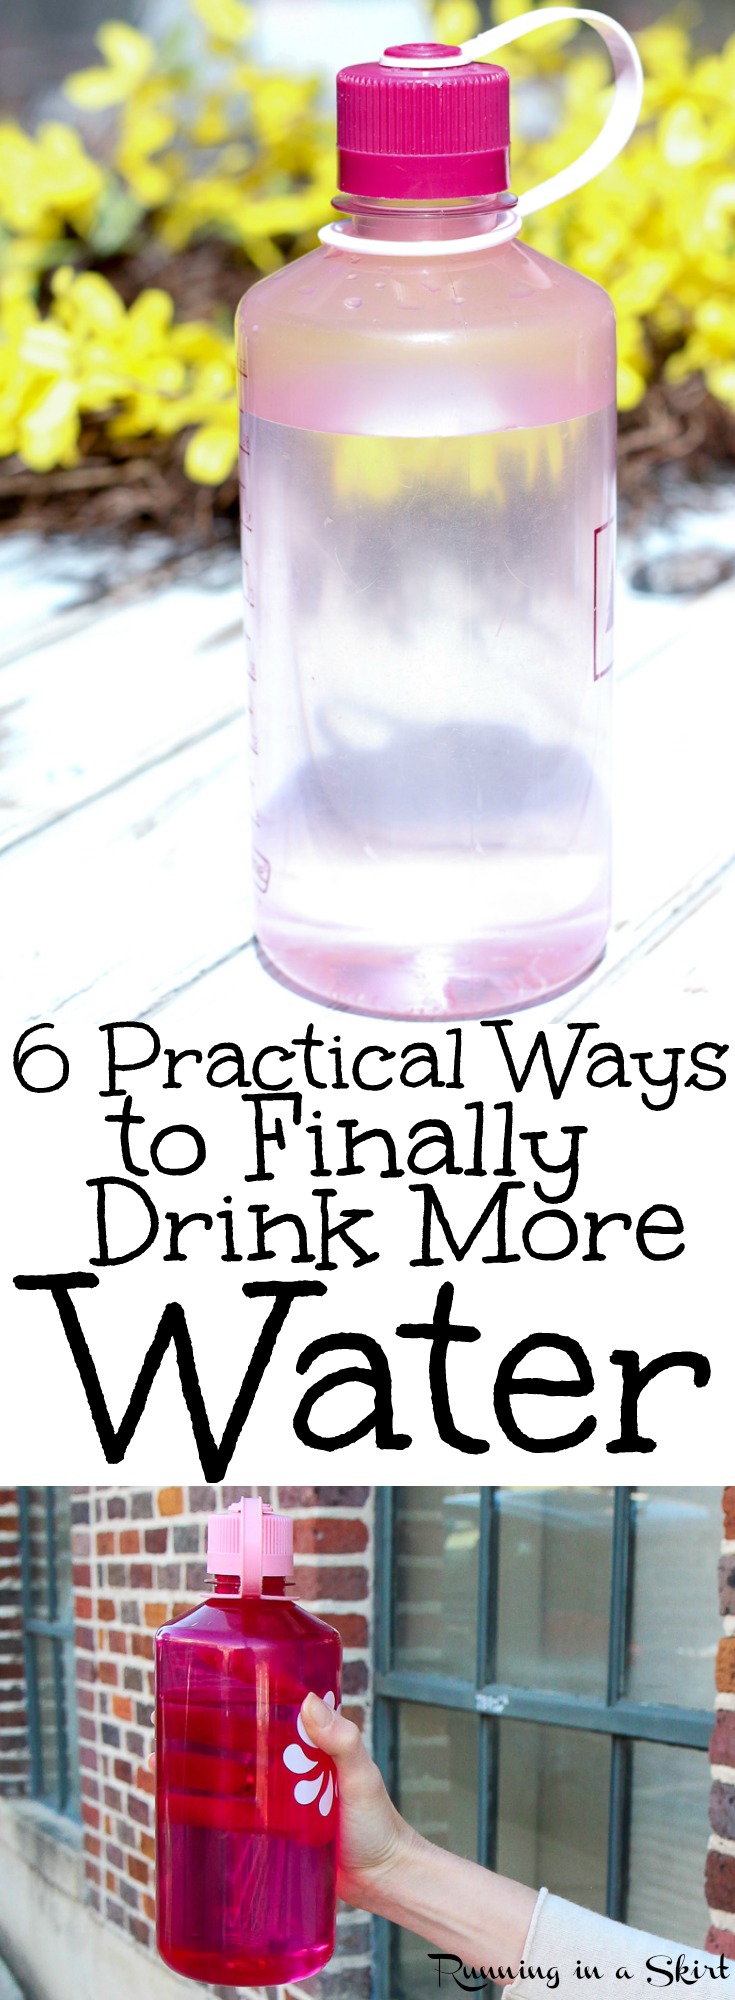 6 Practical Tips on How to Drink More Water. Simple motivation and ideas to get healthy by carrying a bottle with you.  Great natural way to detox your body, have healthy skin, exercise better and even boost your immune system. / Running in a Skirt via @juliewunder